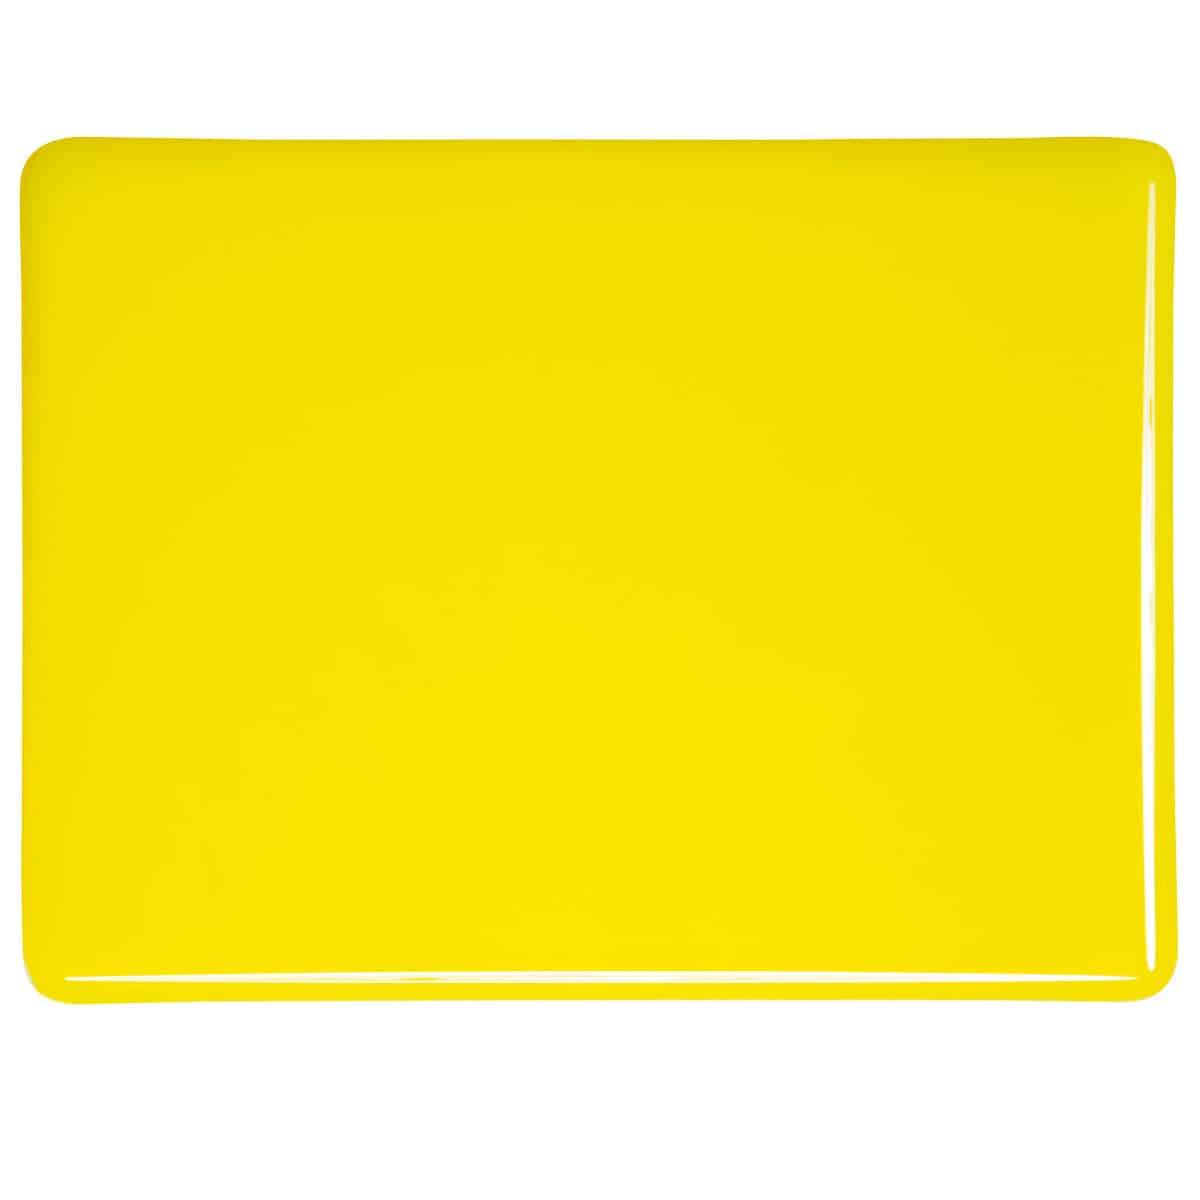 000120 Canary Yellow Opalescent